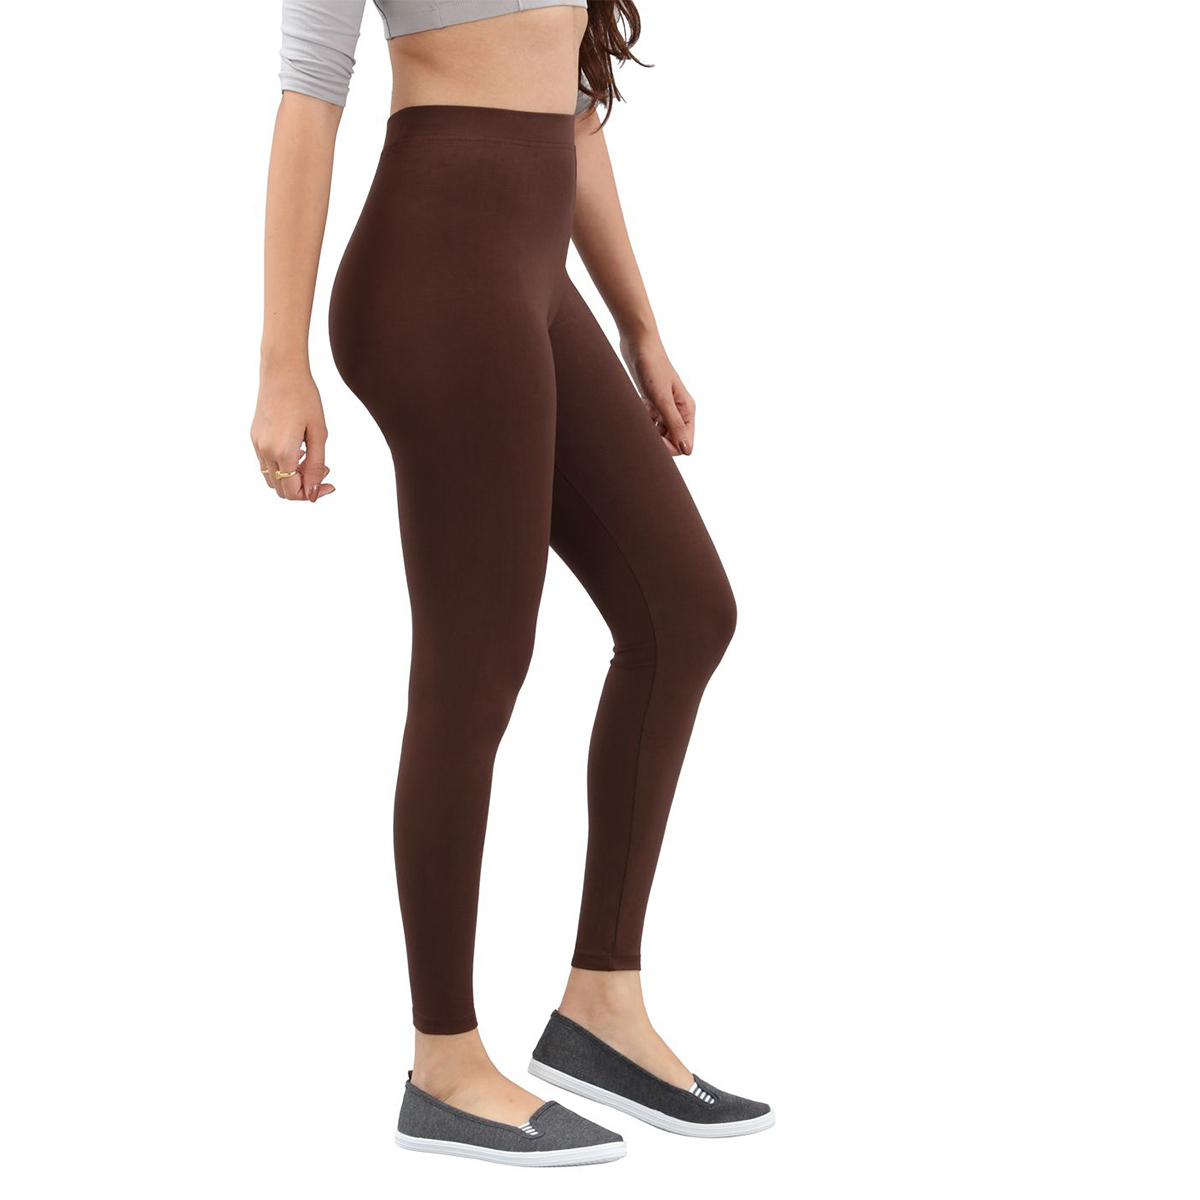 Twin Birds Women Solid Colour Viscose Ankle Length Legging with Signature Wide Waistband - Dark Chocolate